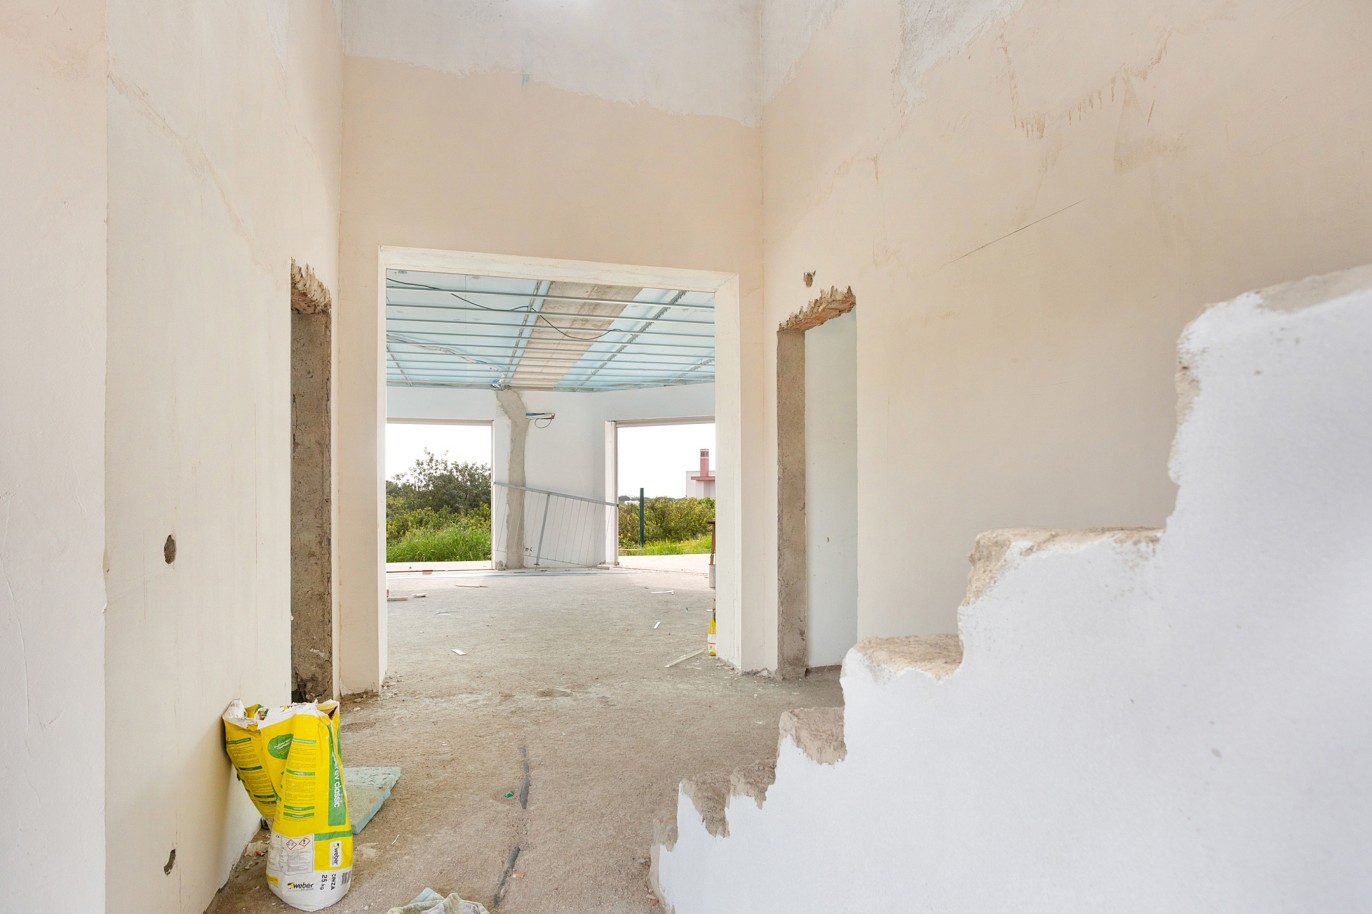 4 Bedroom Villa with pool, new construction, for sale in Albufeira, Algarve_220317